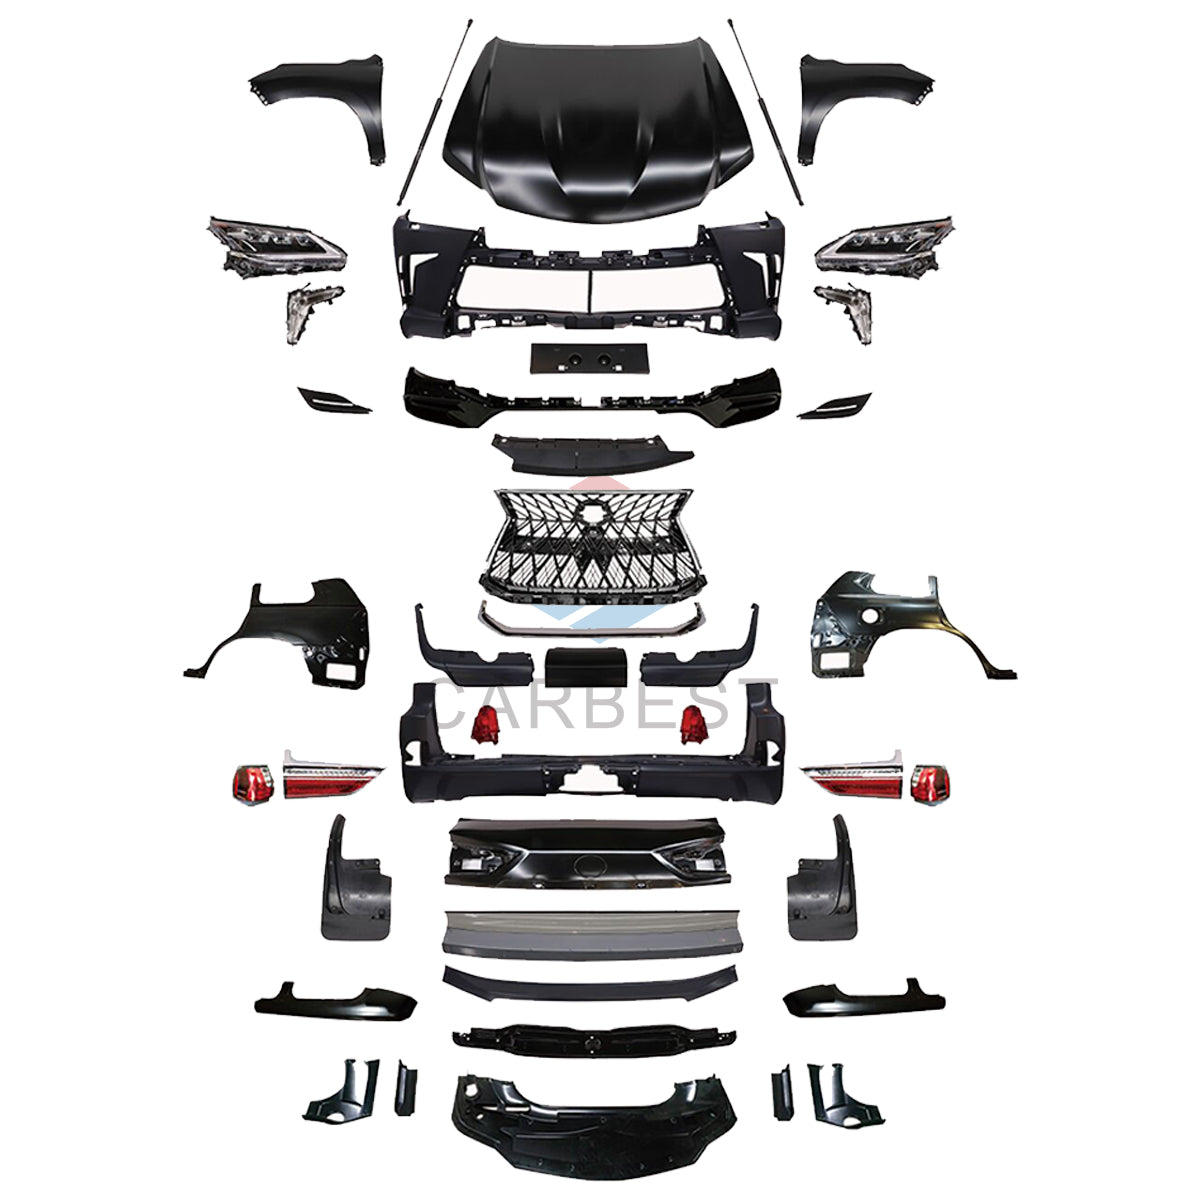 THE BODY KIT FOR LX570 08-15 UPGRADE TO 2016-2018(1:1)